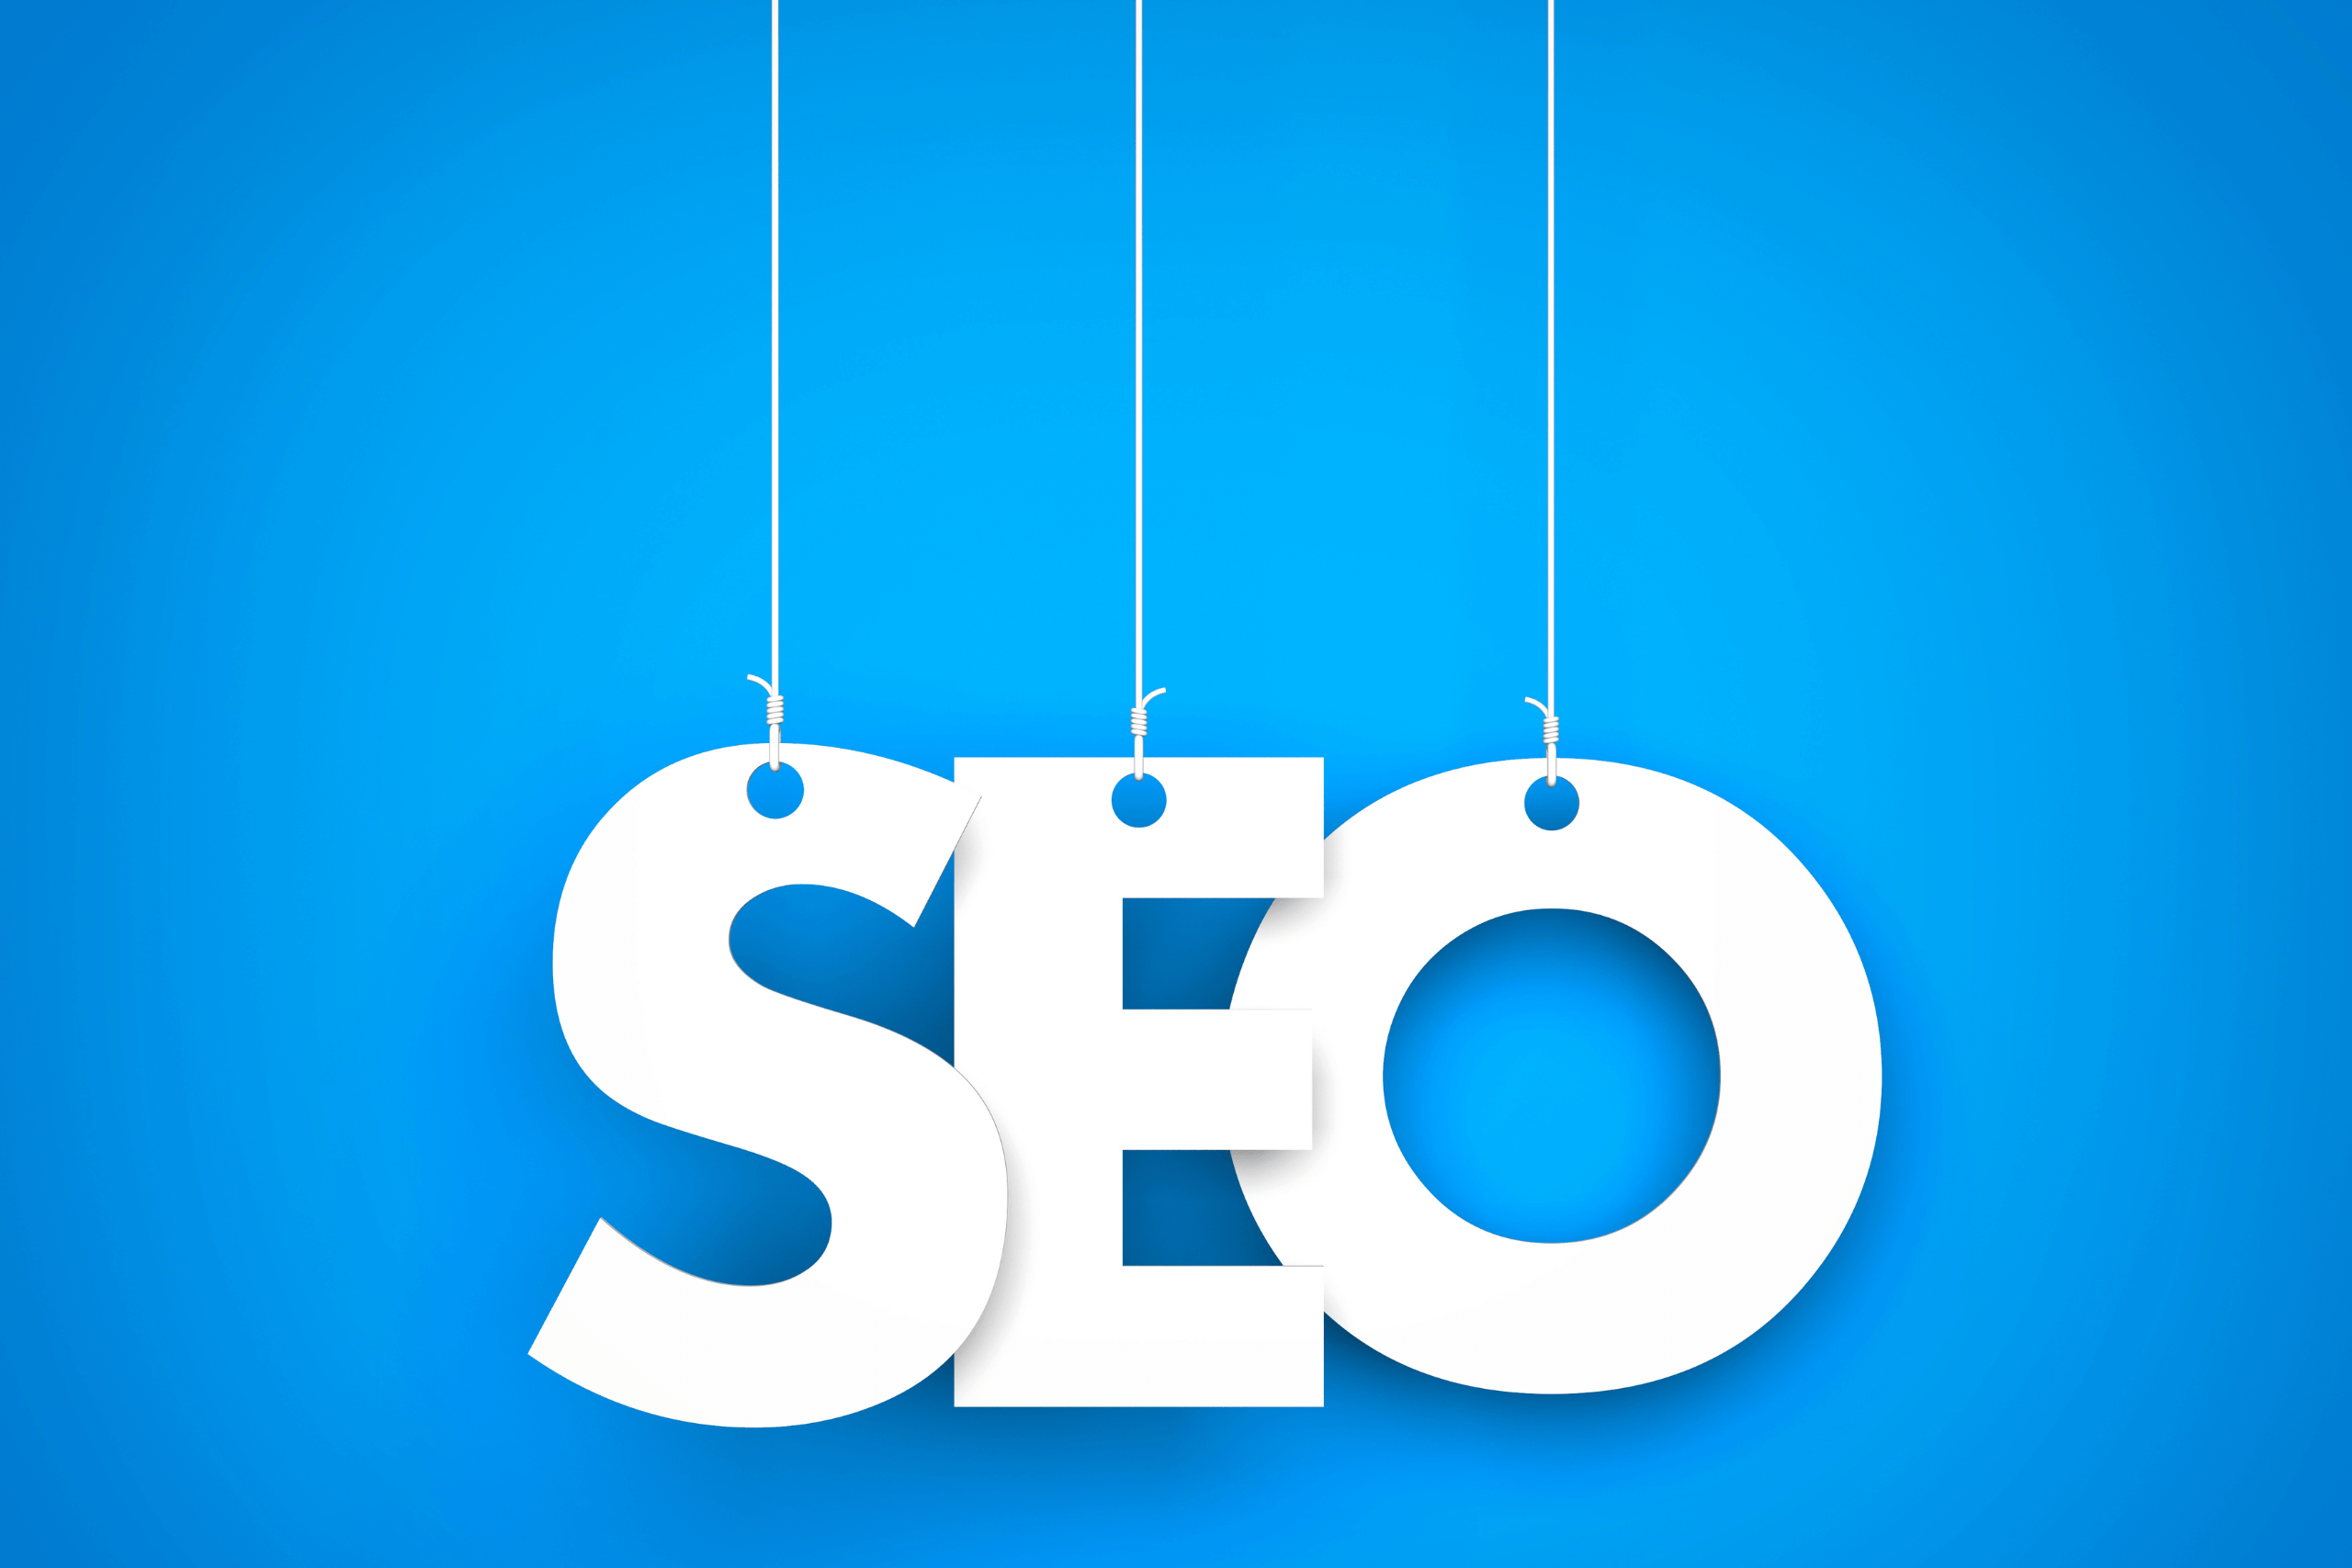 SEO agency in Chelmsford: the key aspects of SEO